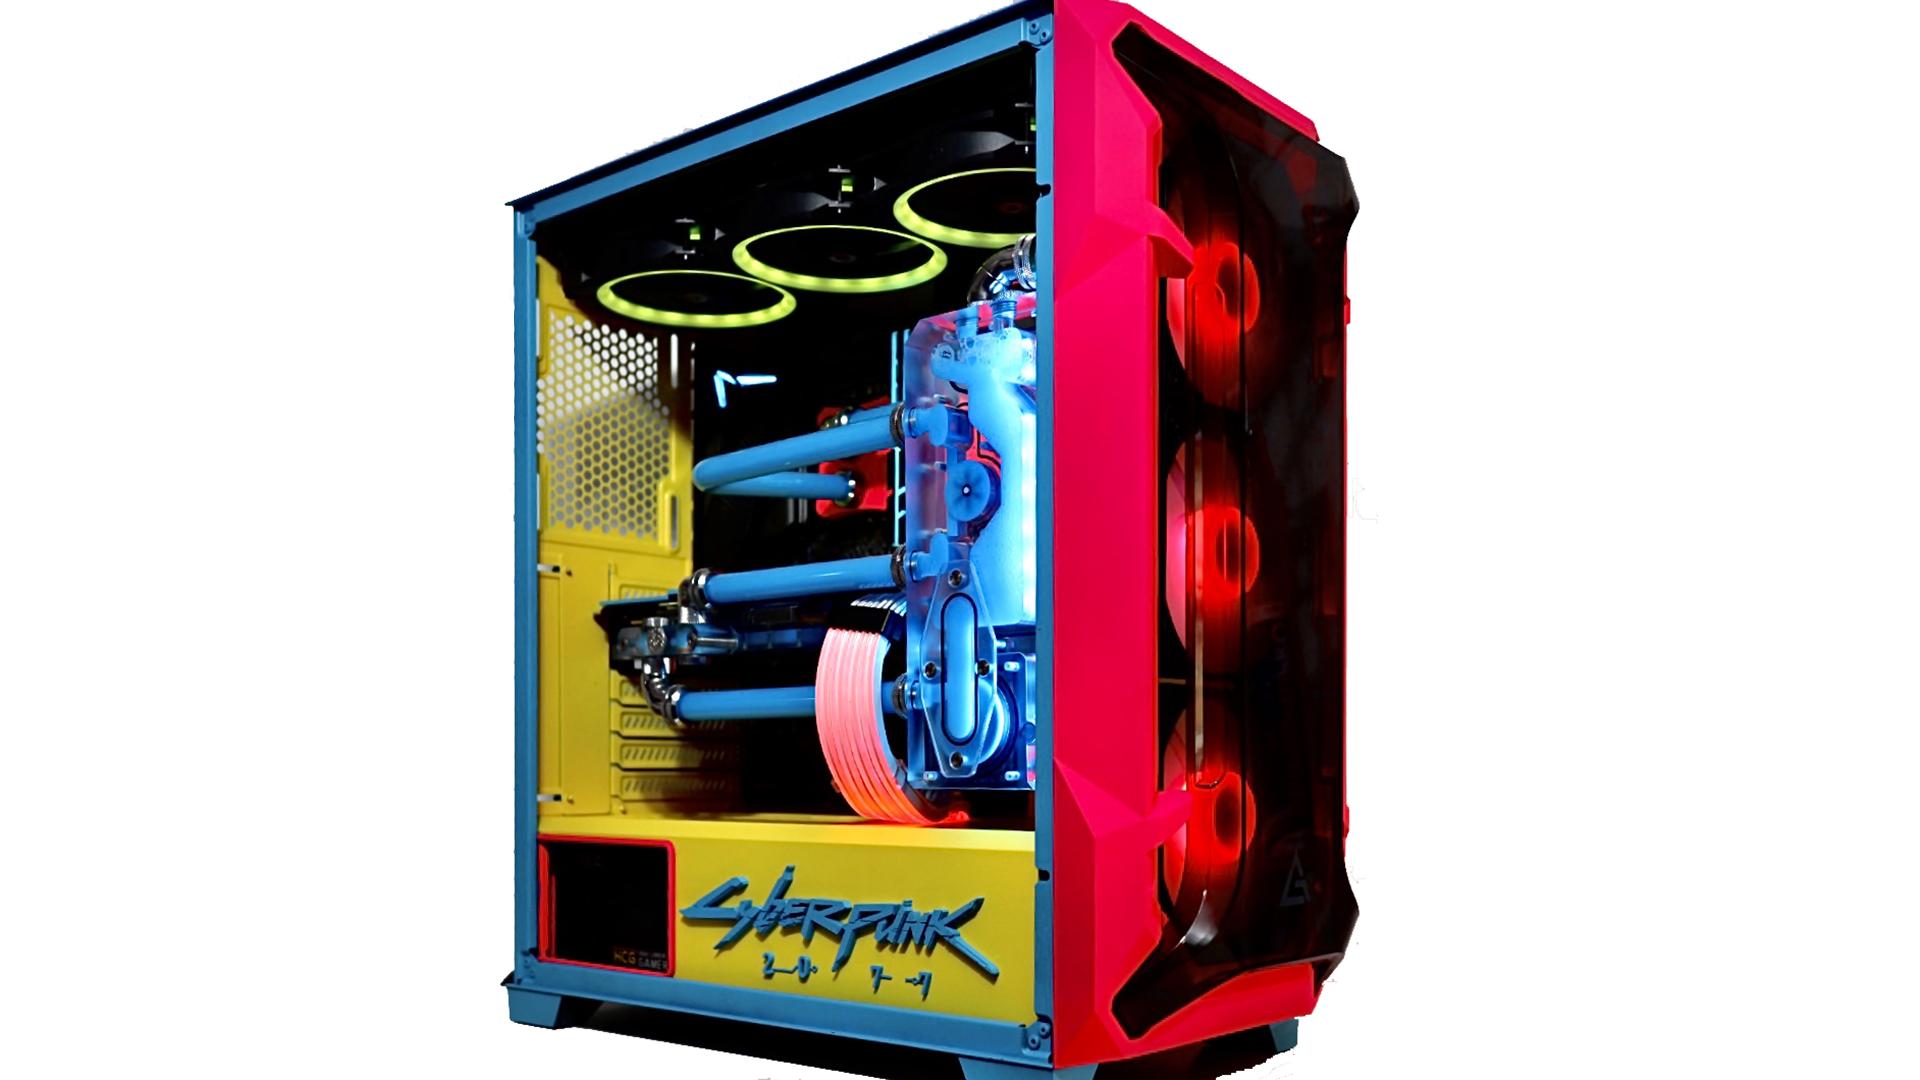 The Cyberpunk 2077 gaming PC with its side panel off